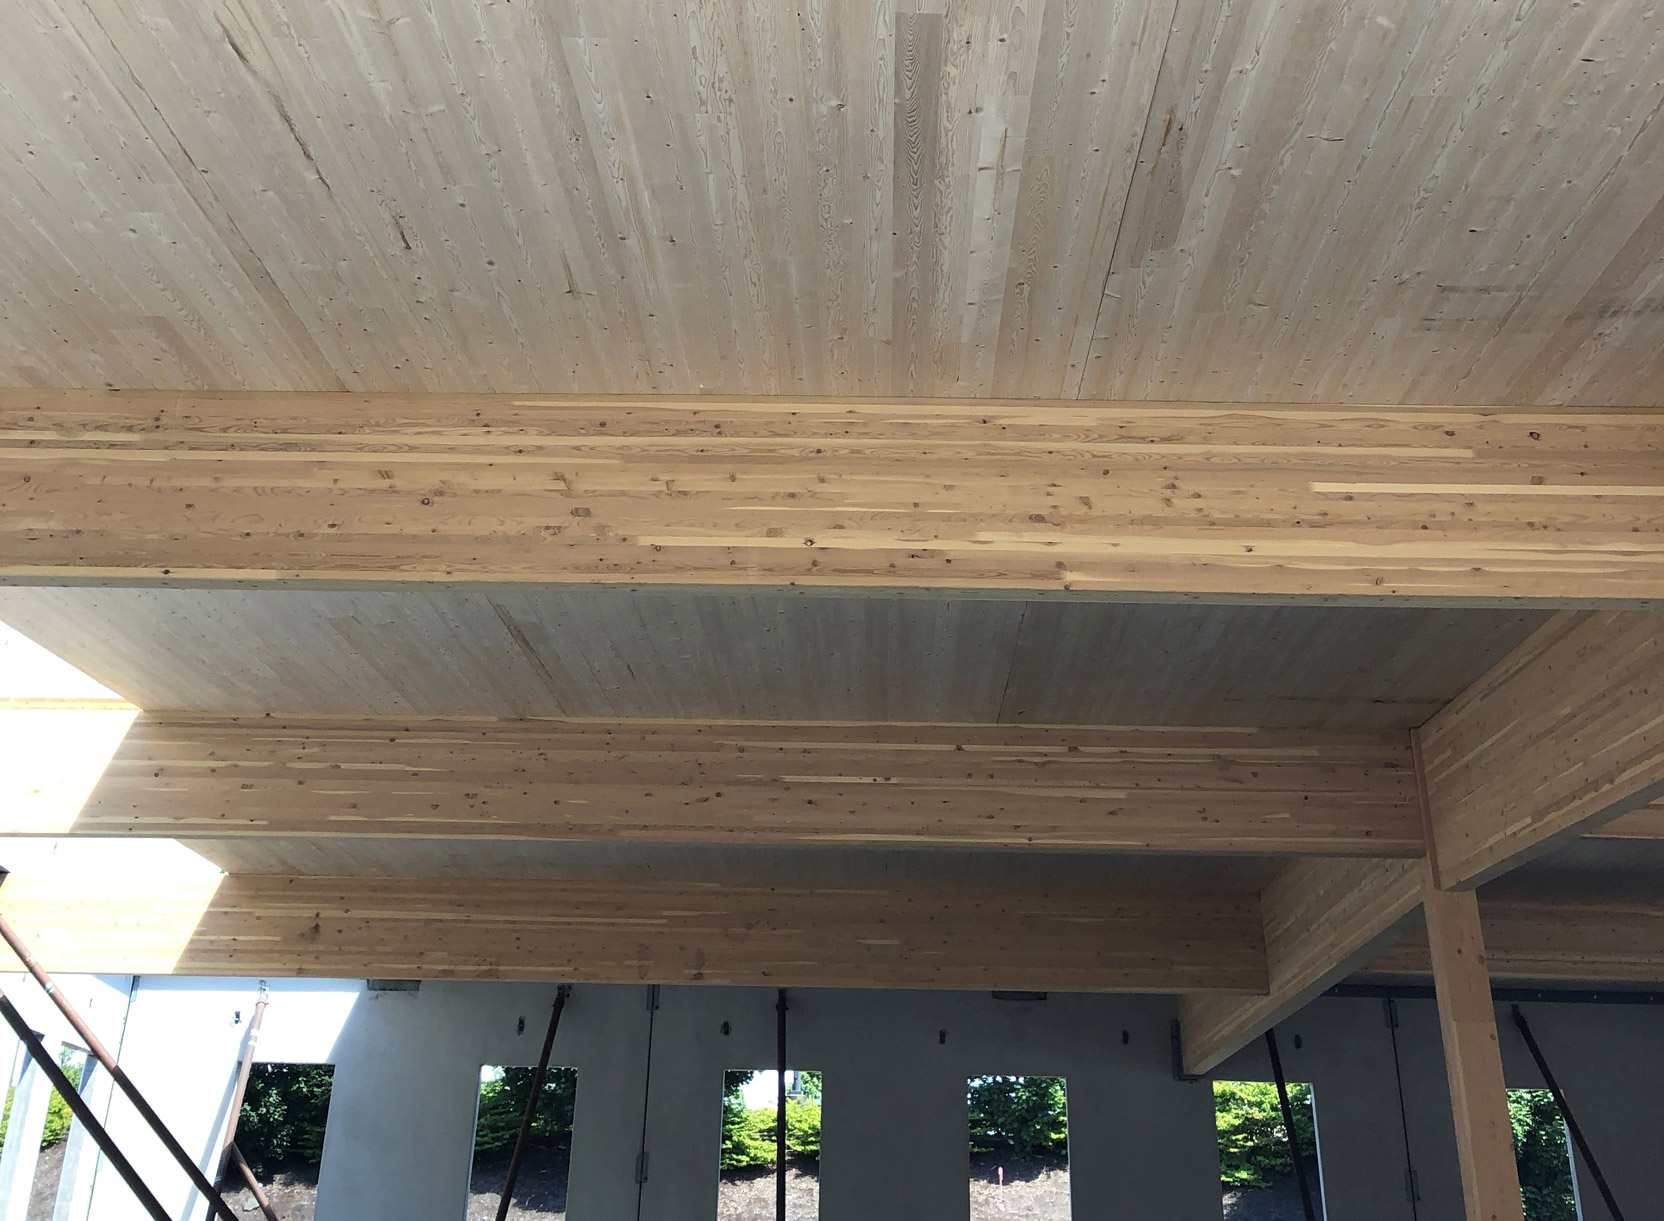 Pacific HemFir Ceiling with large structural timbers